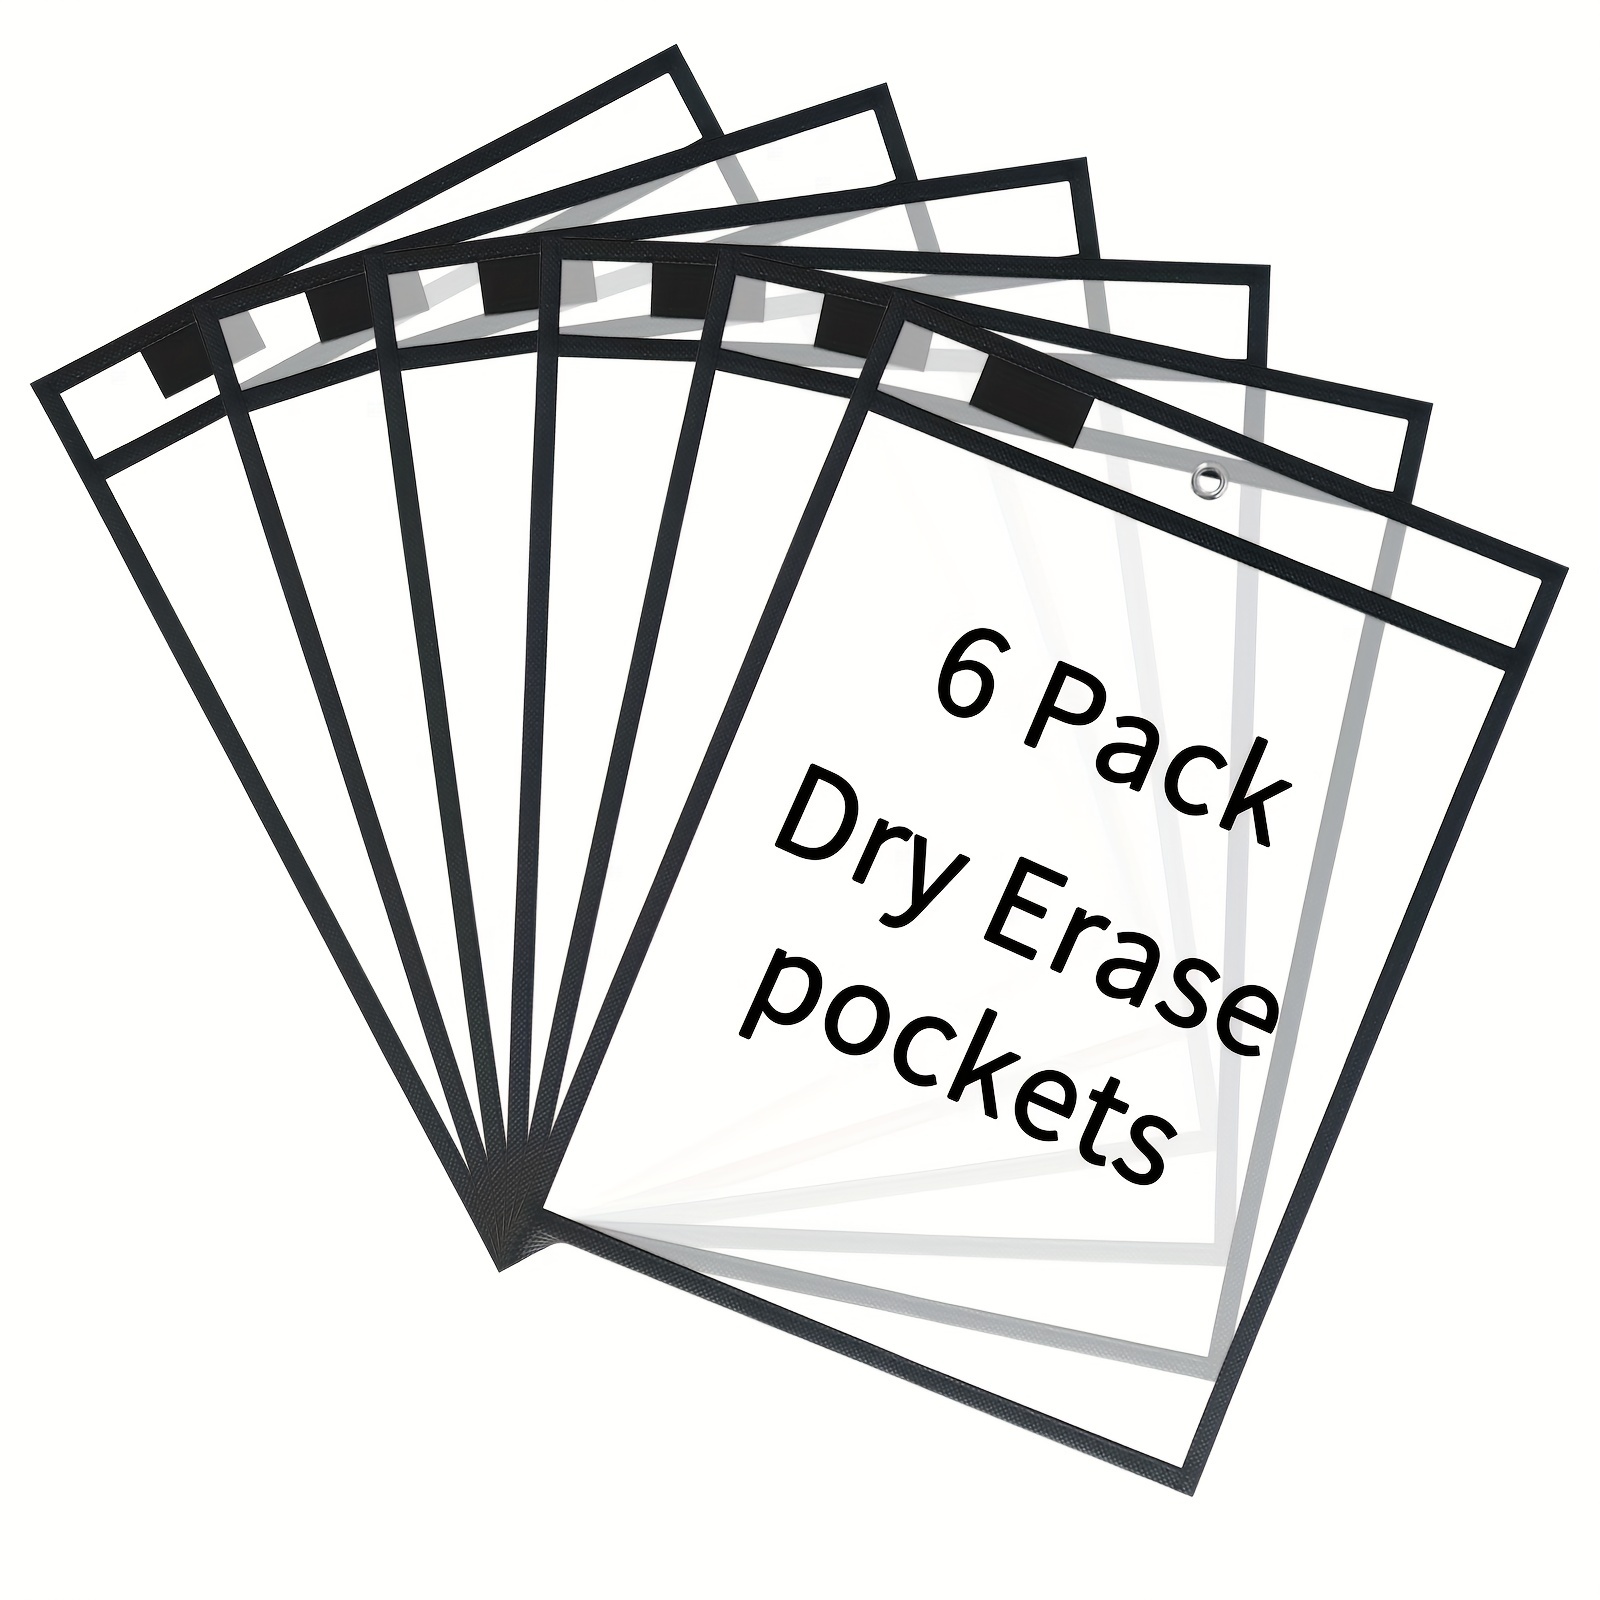 6-Pack Dry Erase Black Pockets Plastic Sleeves for Organized Learning